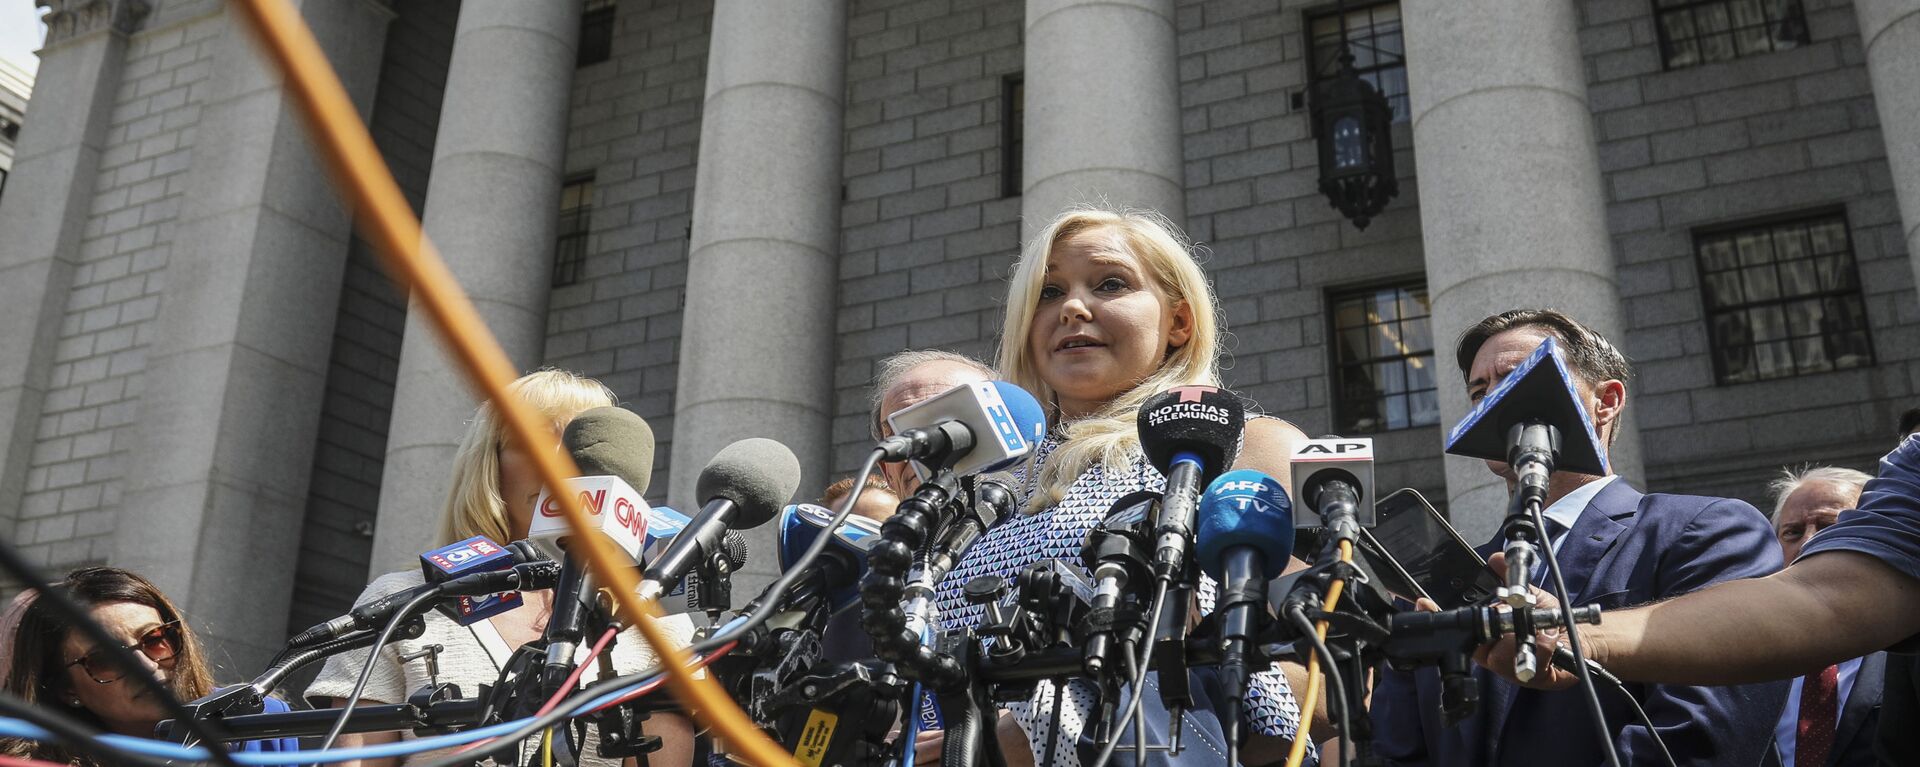 Virginia Roberts Giuffre, center, who says she was trafficked by sex offender Jeffrey Epstein, holds a news conference outside a Manhattan court - Sputnik International, 1920, 10.08.2021